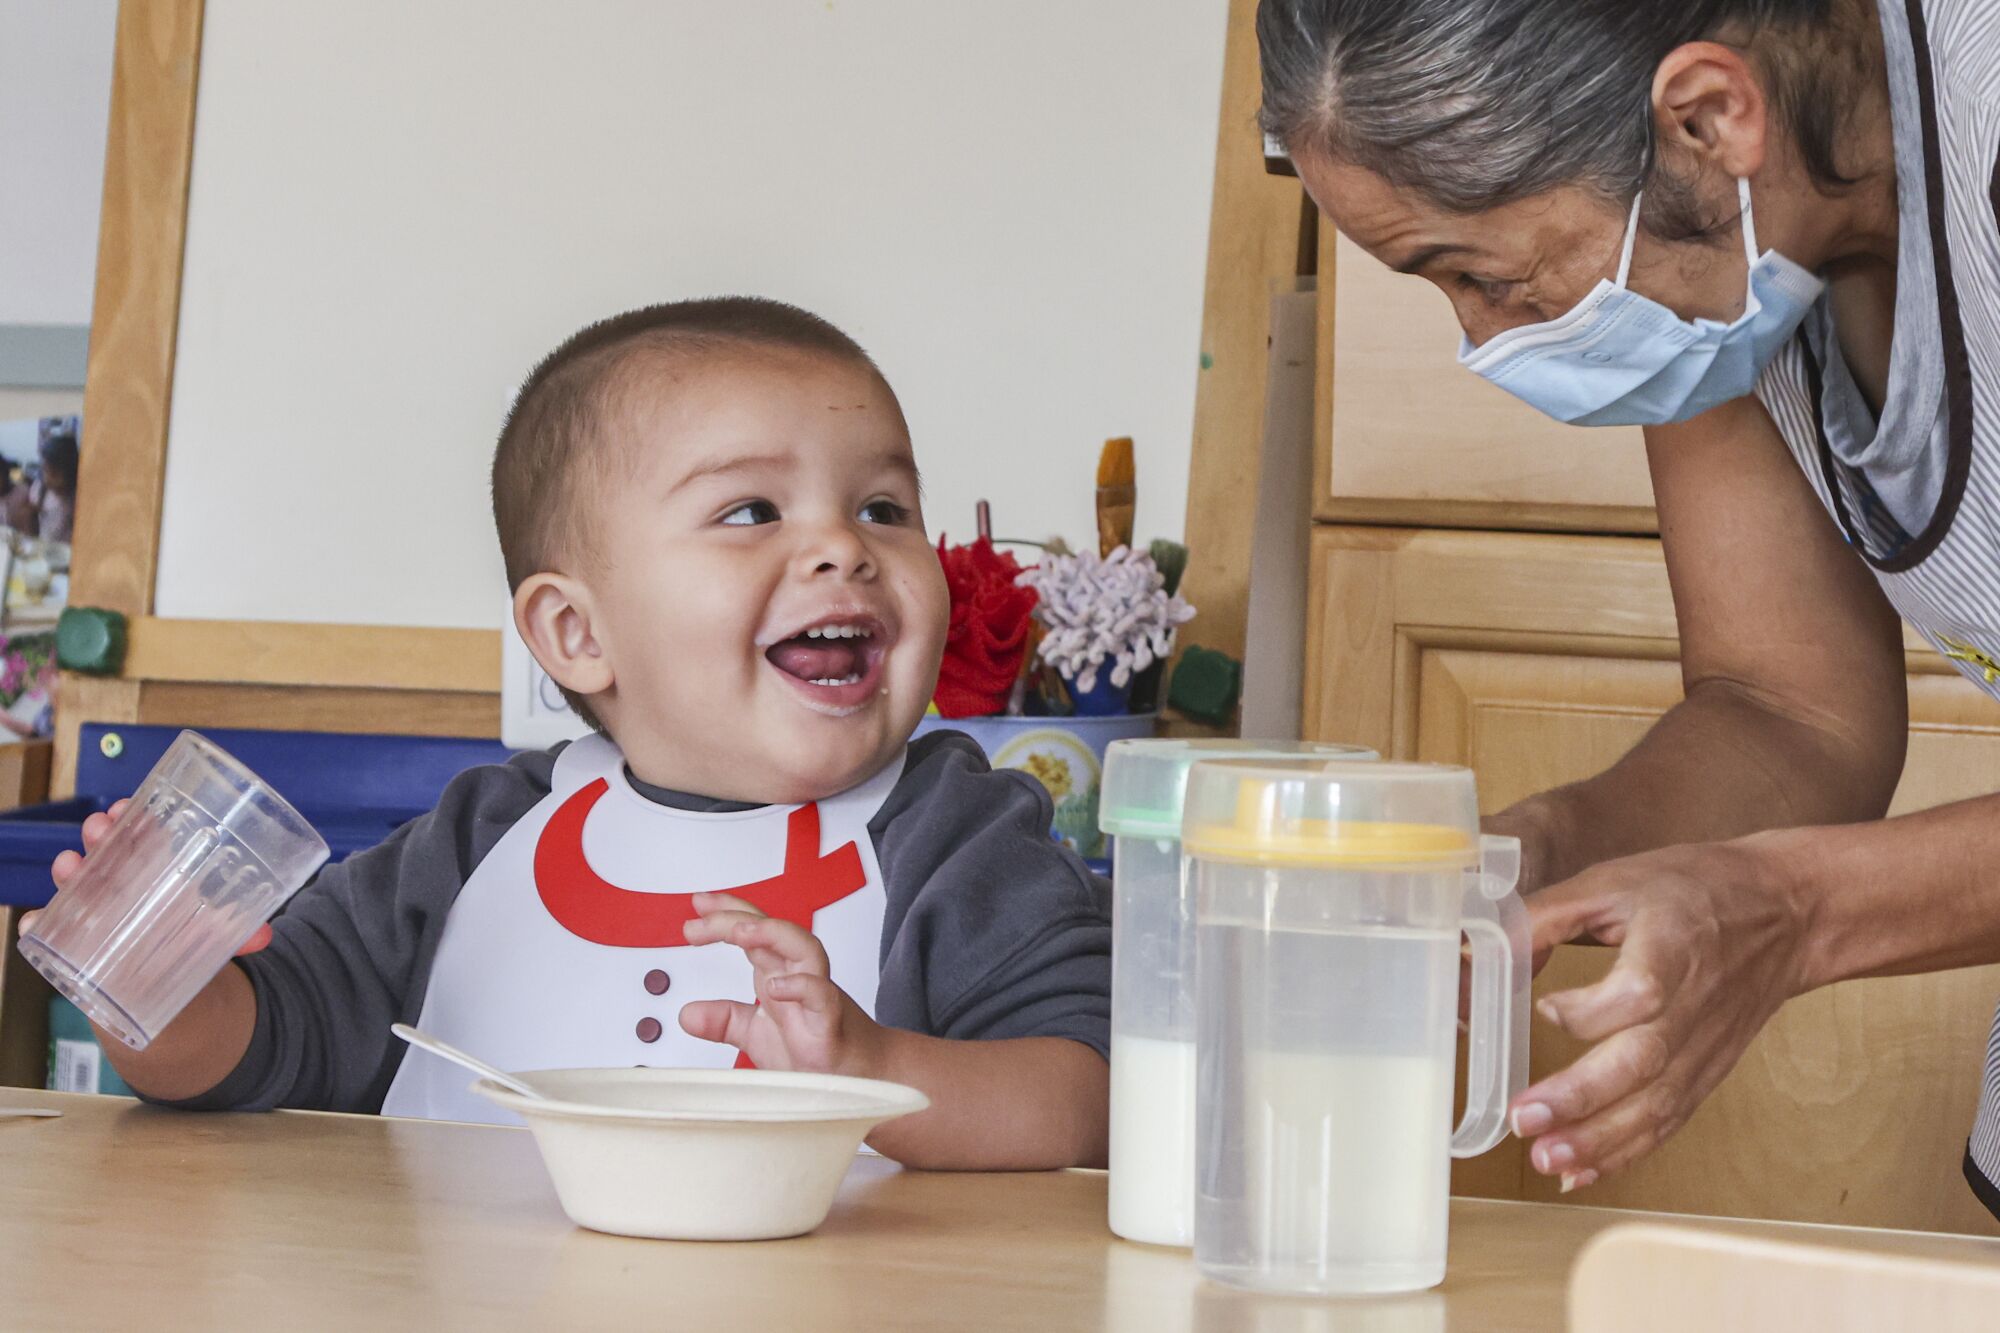 A toddler in a bib holds a cup, laughs and looks up at a woman in a face mask who leans toward him, gesturing playfully.